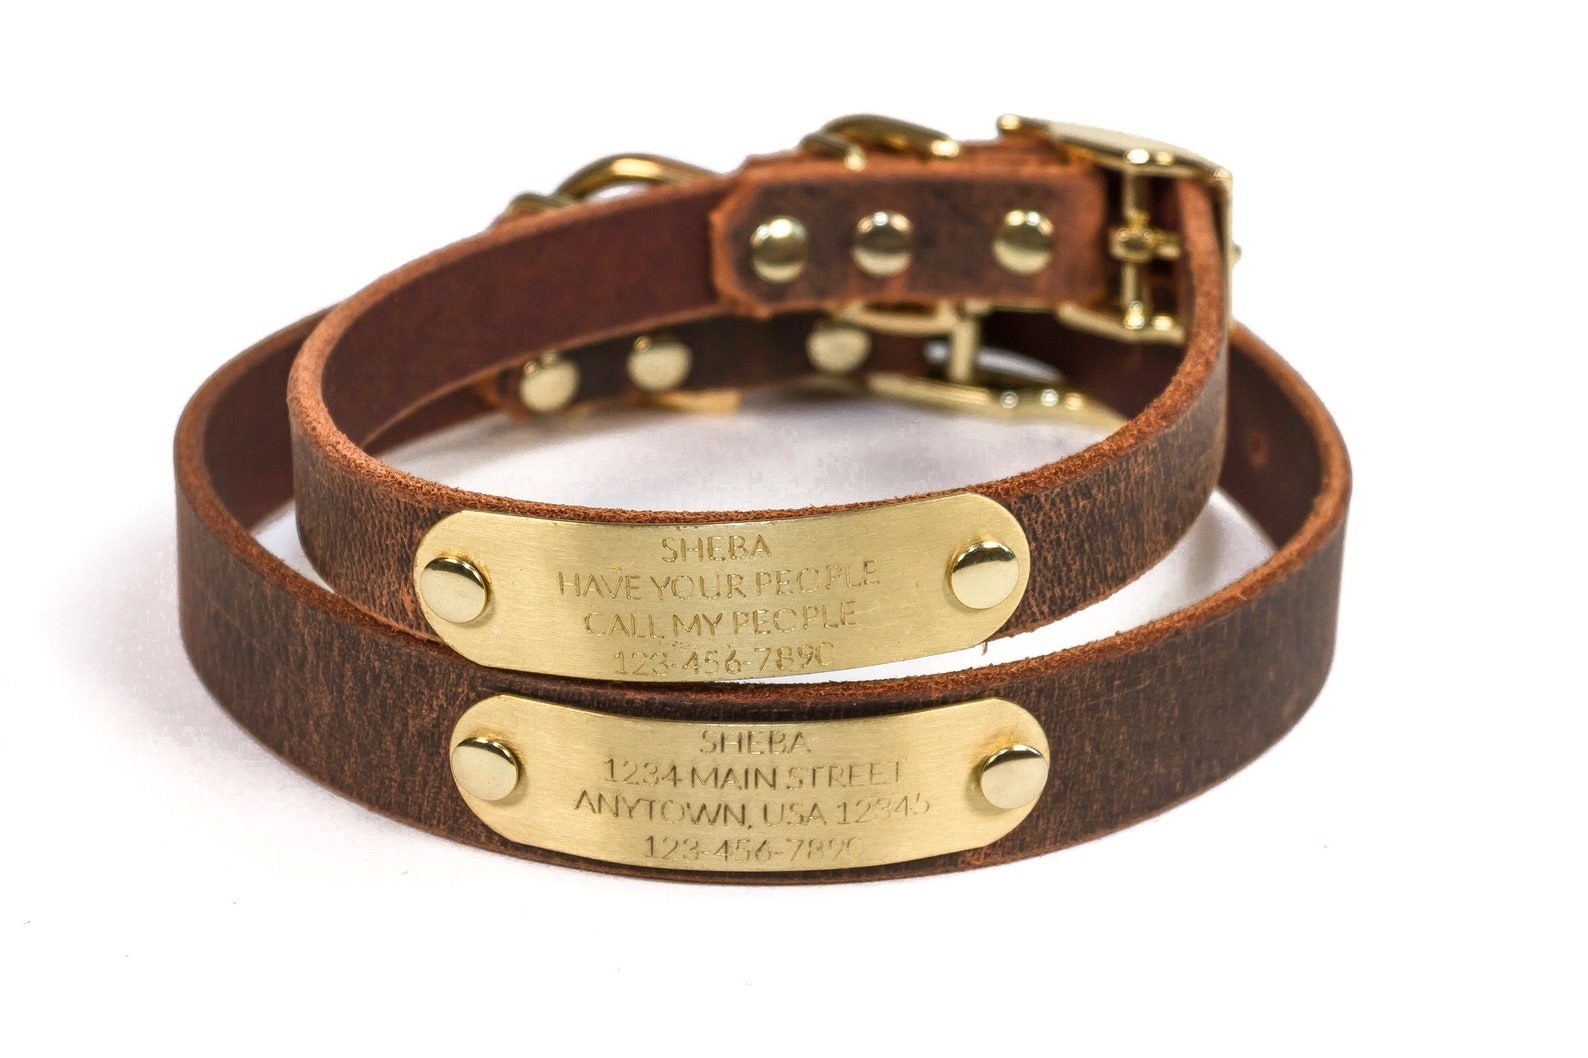 two of the brown leather dog collars with personalized nameplates